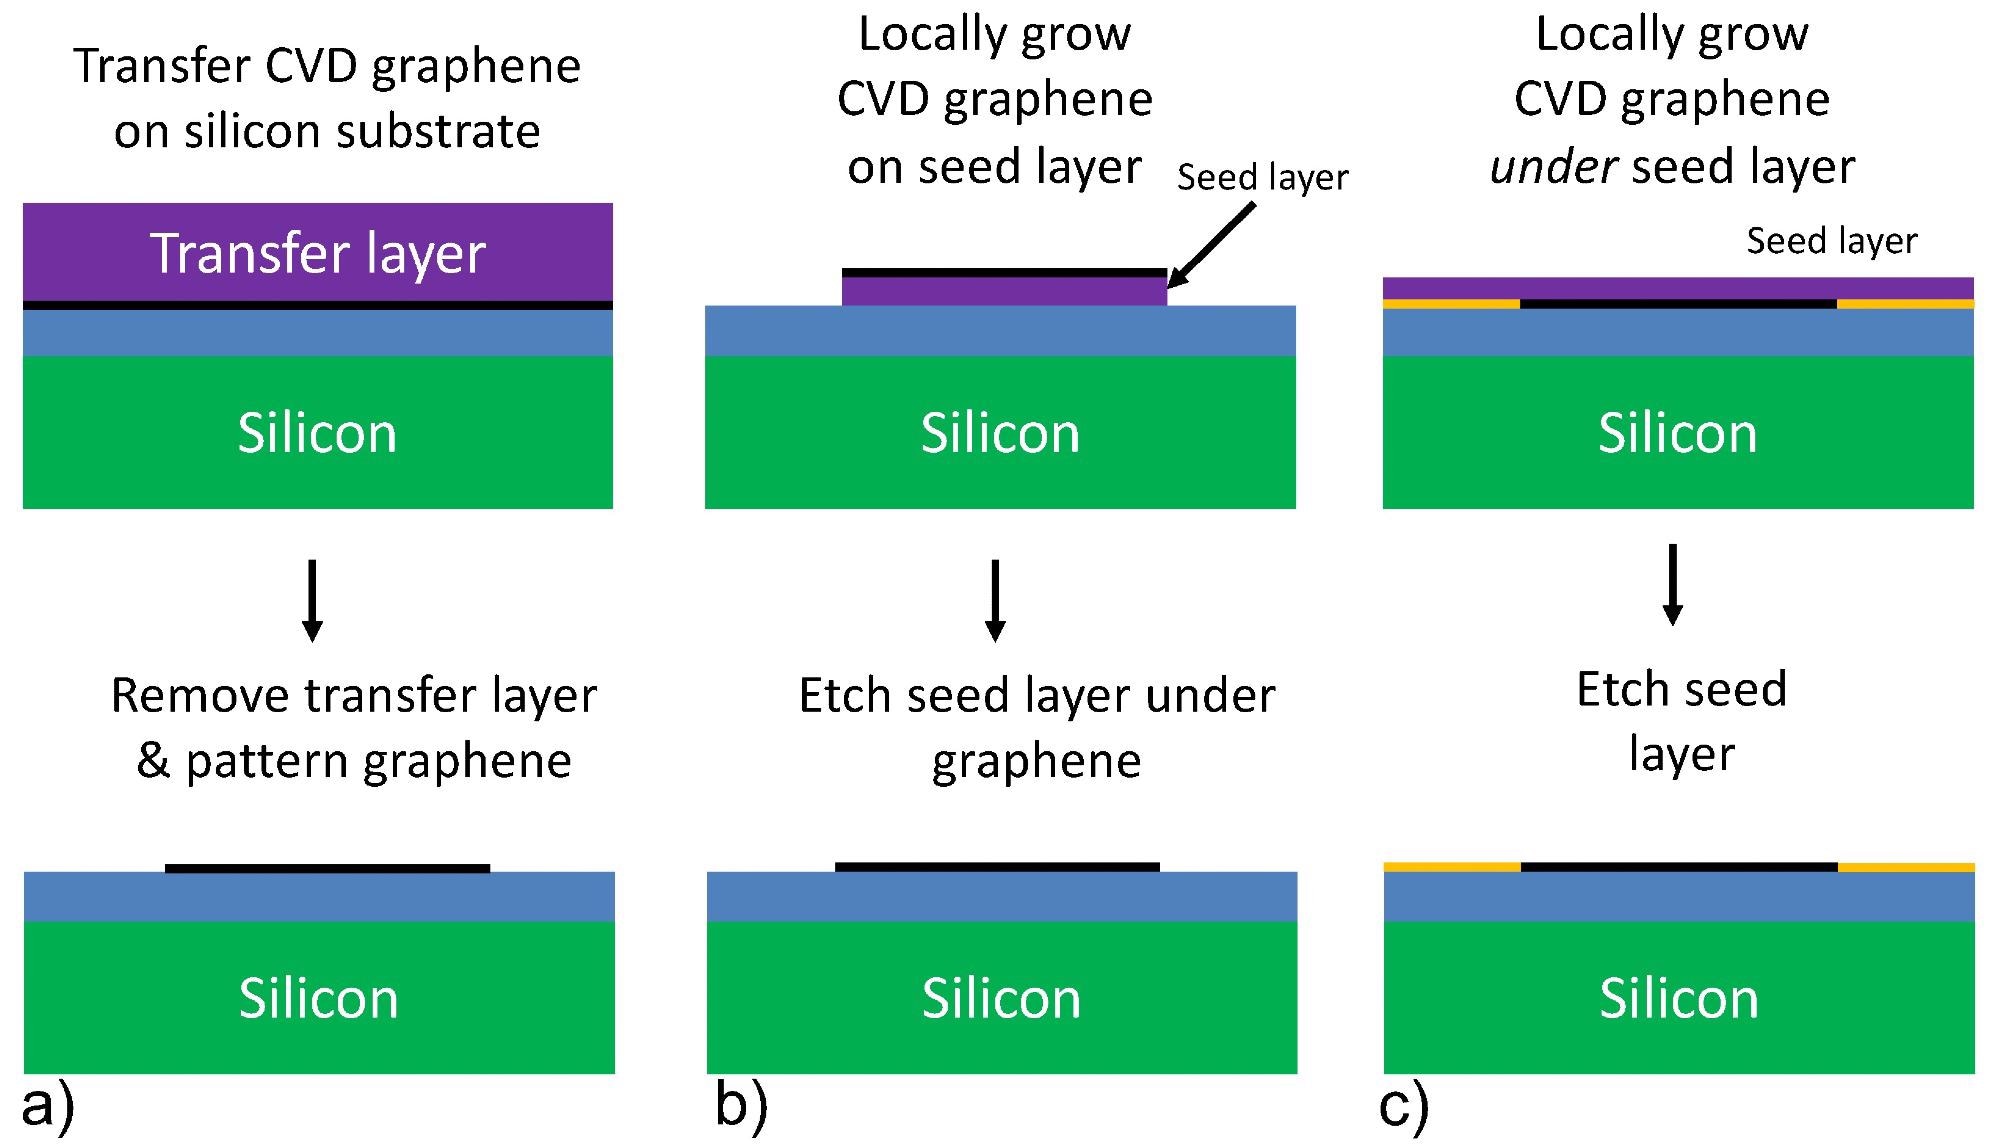 Schematic flows for transfer-based and transfer-free integration of CVD graphene on silicon wafers. (a) Transfer-based integration flow. (b) Transfer-free integration flow, growing graphene locally on top of a seed layer (purple). (c) The focus of this work: transfer-free integration flow growing graphene under a seed layer, where the yellow blocking structure layer is used to define the local graphene growth region. The blue layer in the figure can be the CMOS backend SiO2 layer, or any other interface of choice.